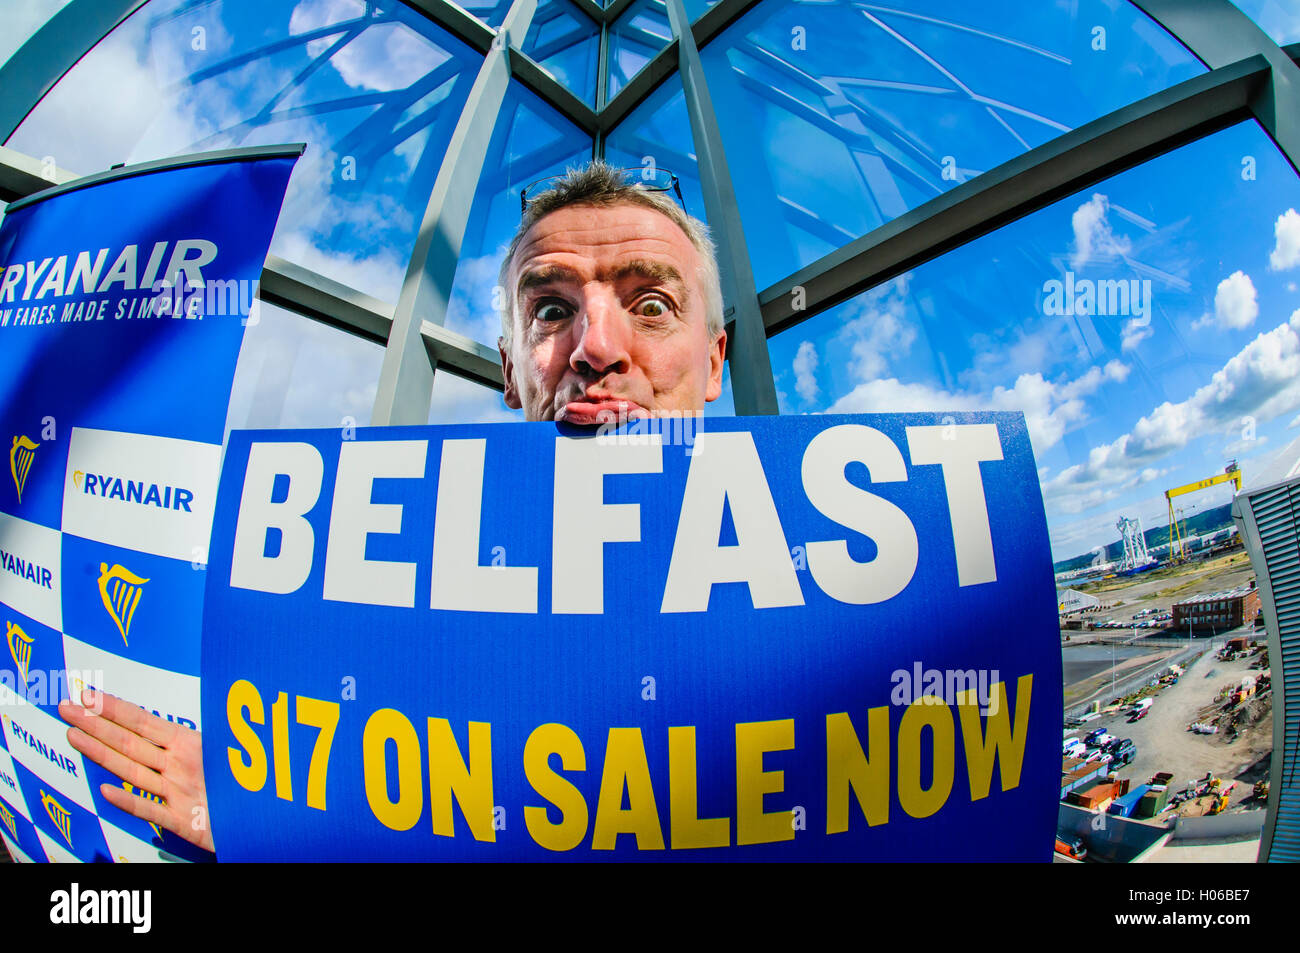 Belfast, Northern Ireland. 20 Sep 2016 - Michael O'Leary, CEO of Ryanair, criticises the Northern Ireland Assembly, calls for the scrapping of Airline Passenger Duty in Northern Ireland, and announces more seats from Belfast. Credit:  Stephen Barnes/Alamy Live News Stock Photo